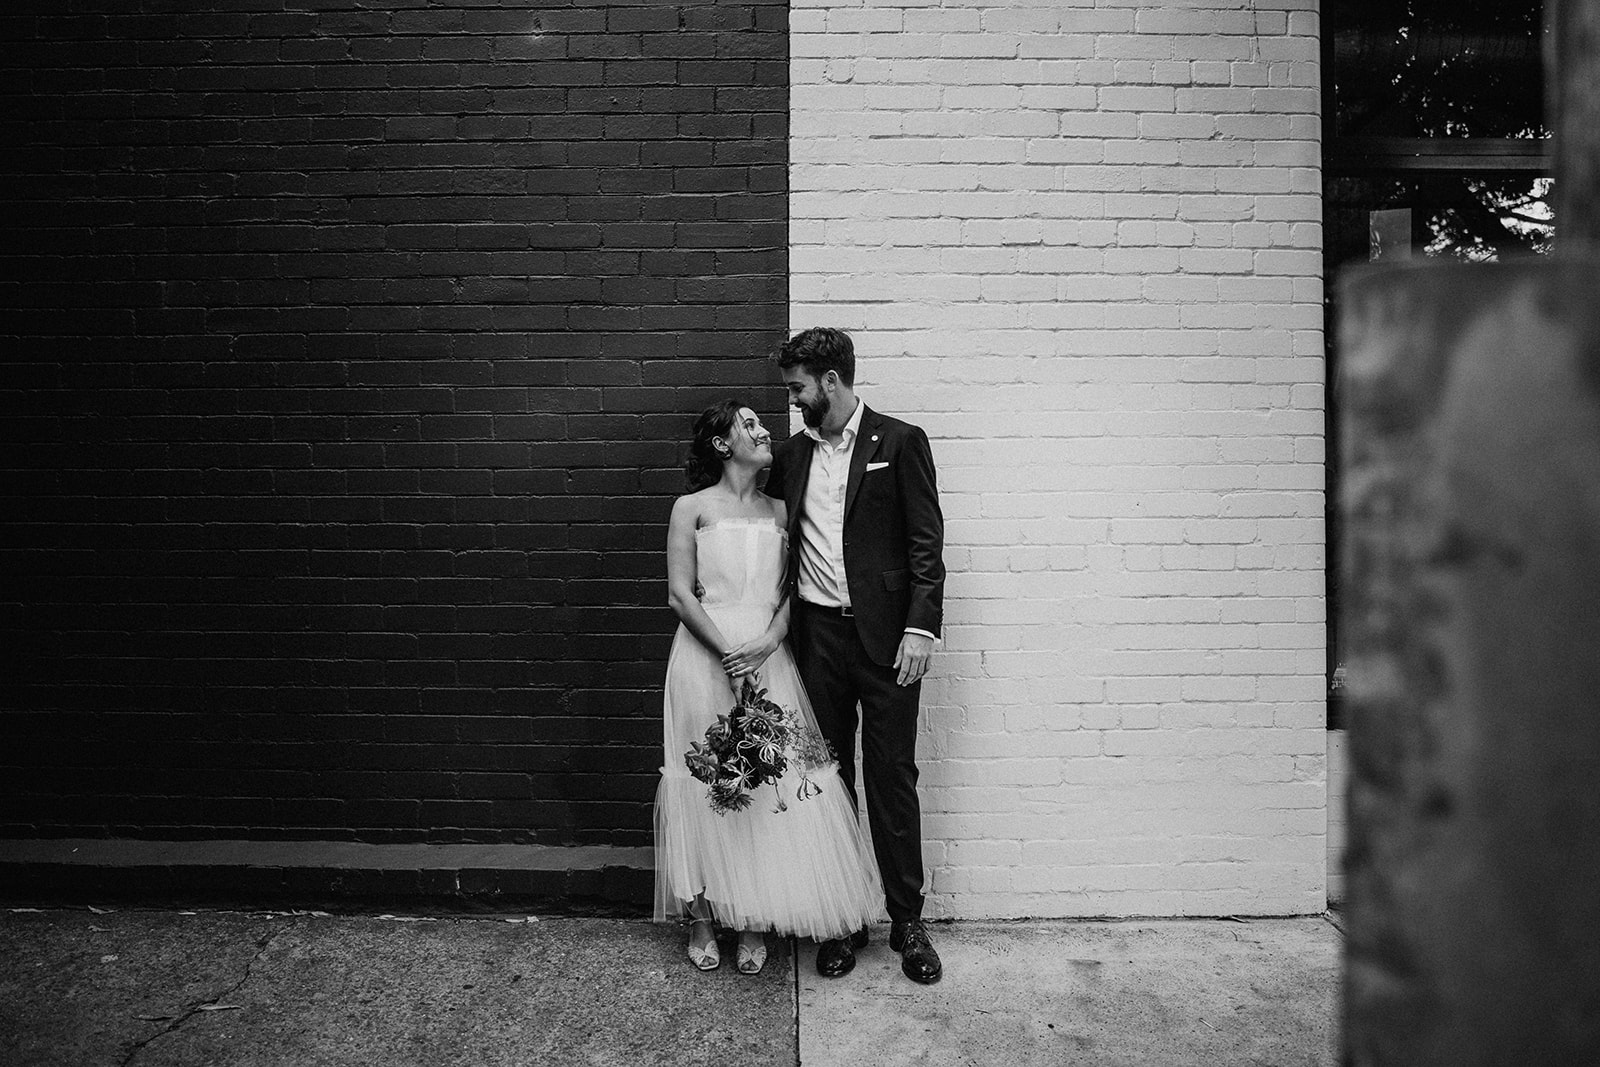 Scott Surplice portrait of bride and groom on black and white wall